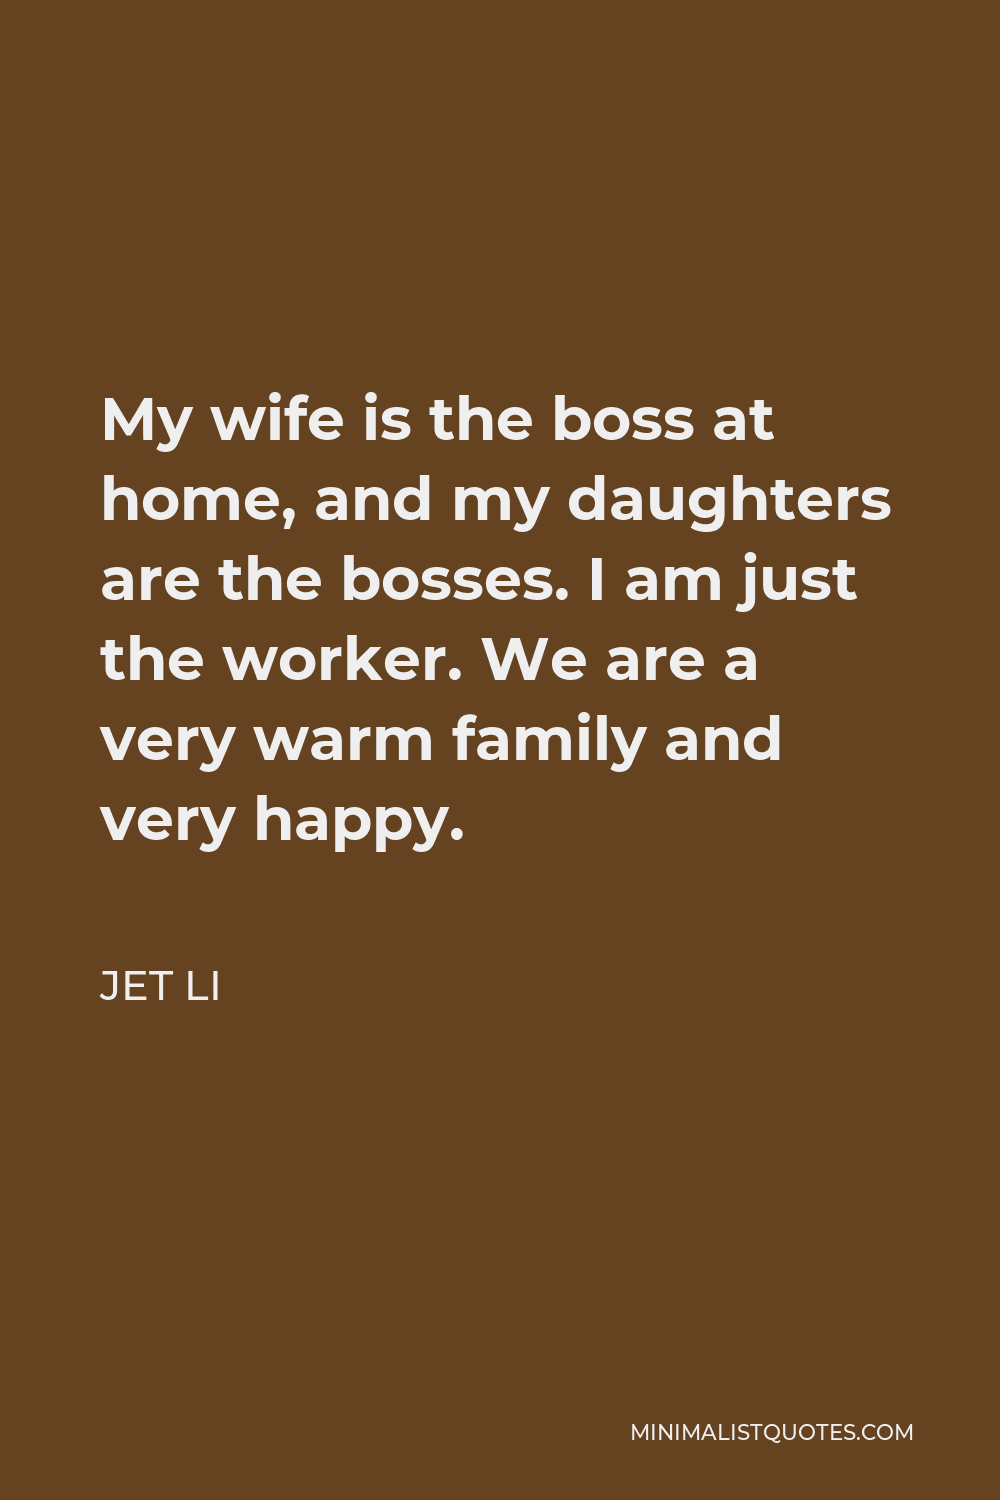 Jet Li Quote - My wife is the boss at home, and my daughters are the bosses. I am just the worker. We are a very warm family and very happy.